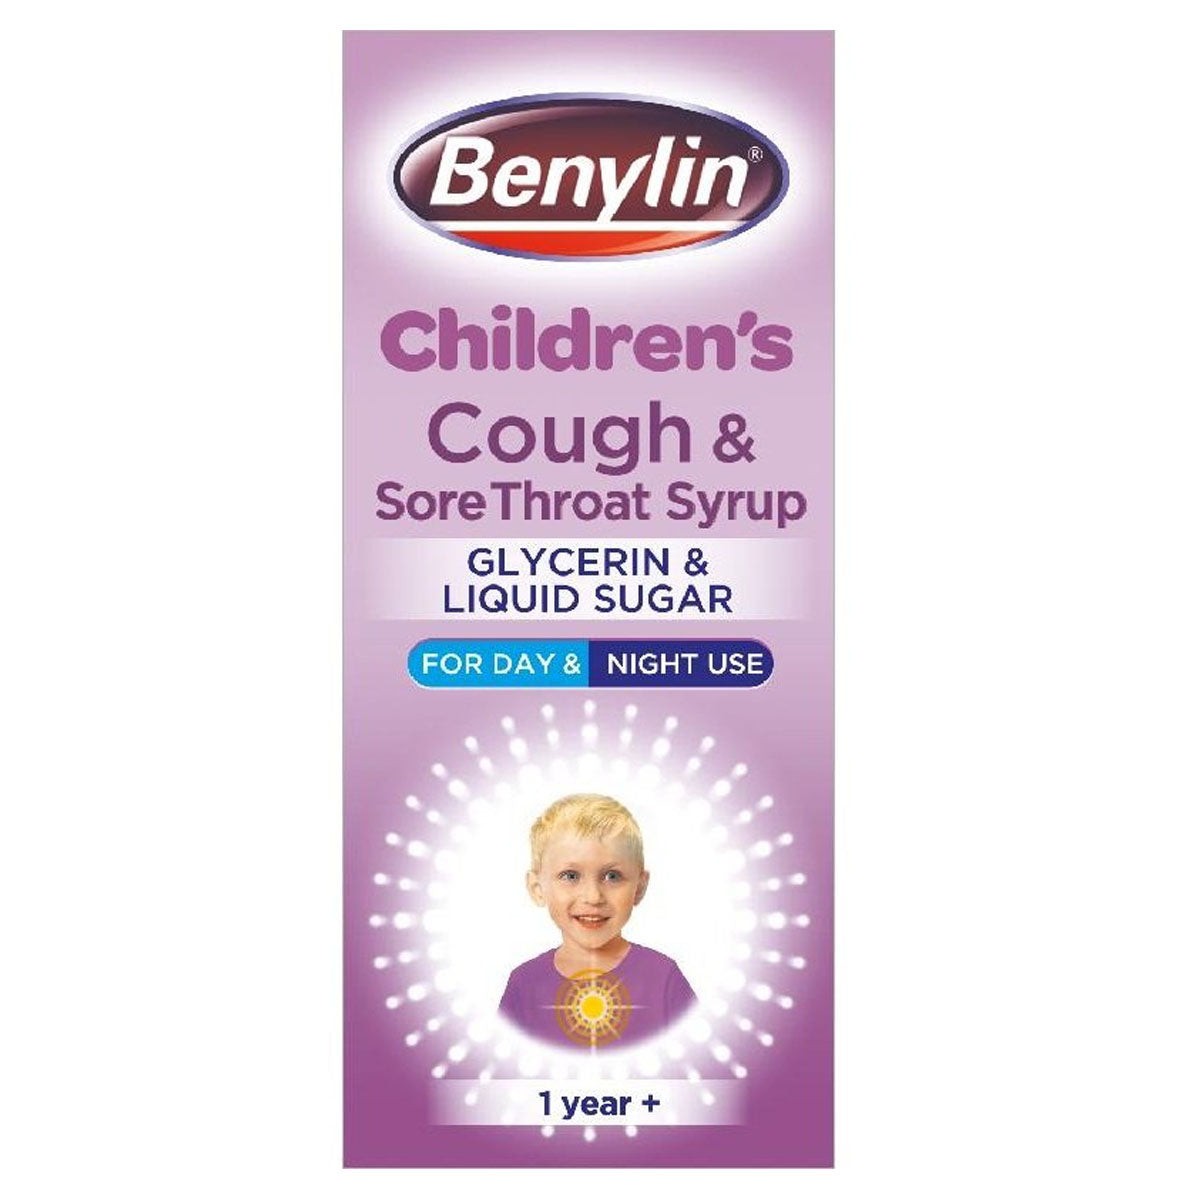 Benylin - Children's Cough & Sore Throat Syrup 1 Year+ - 125ml - Continental Food Store